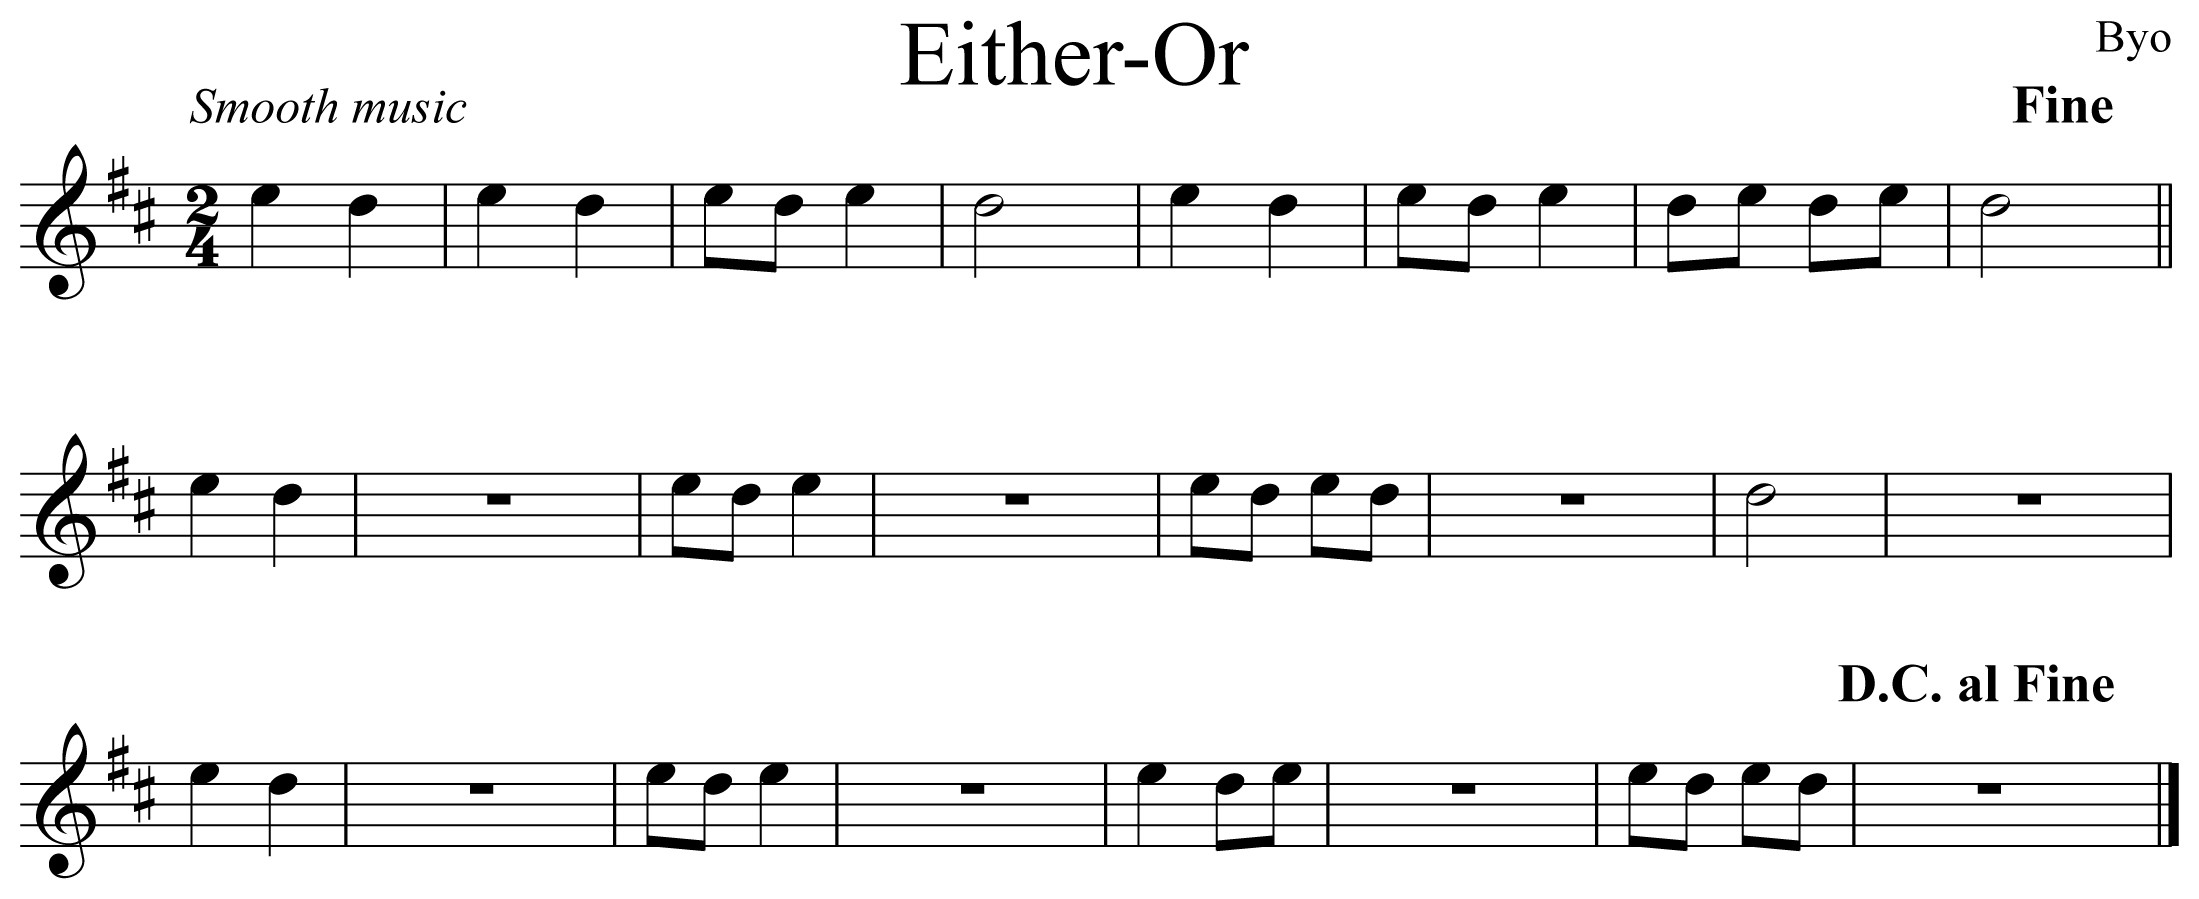 Either Or Music Notation Saxophone